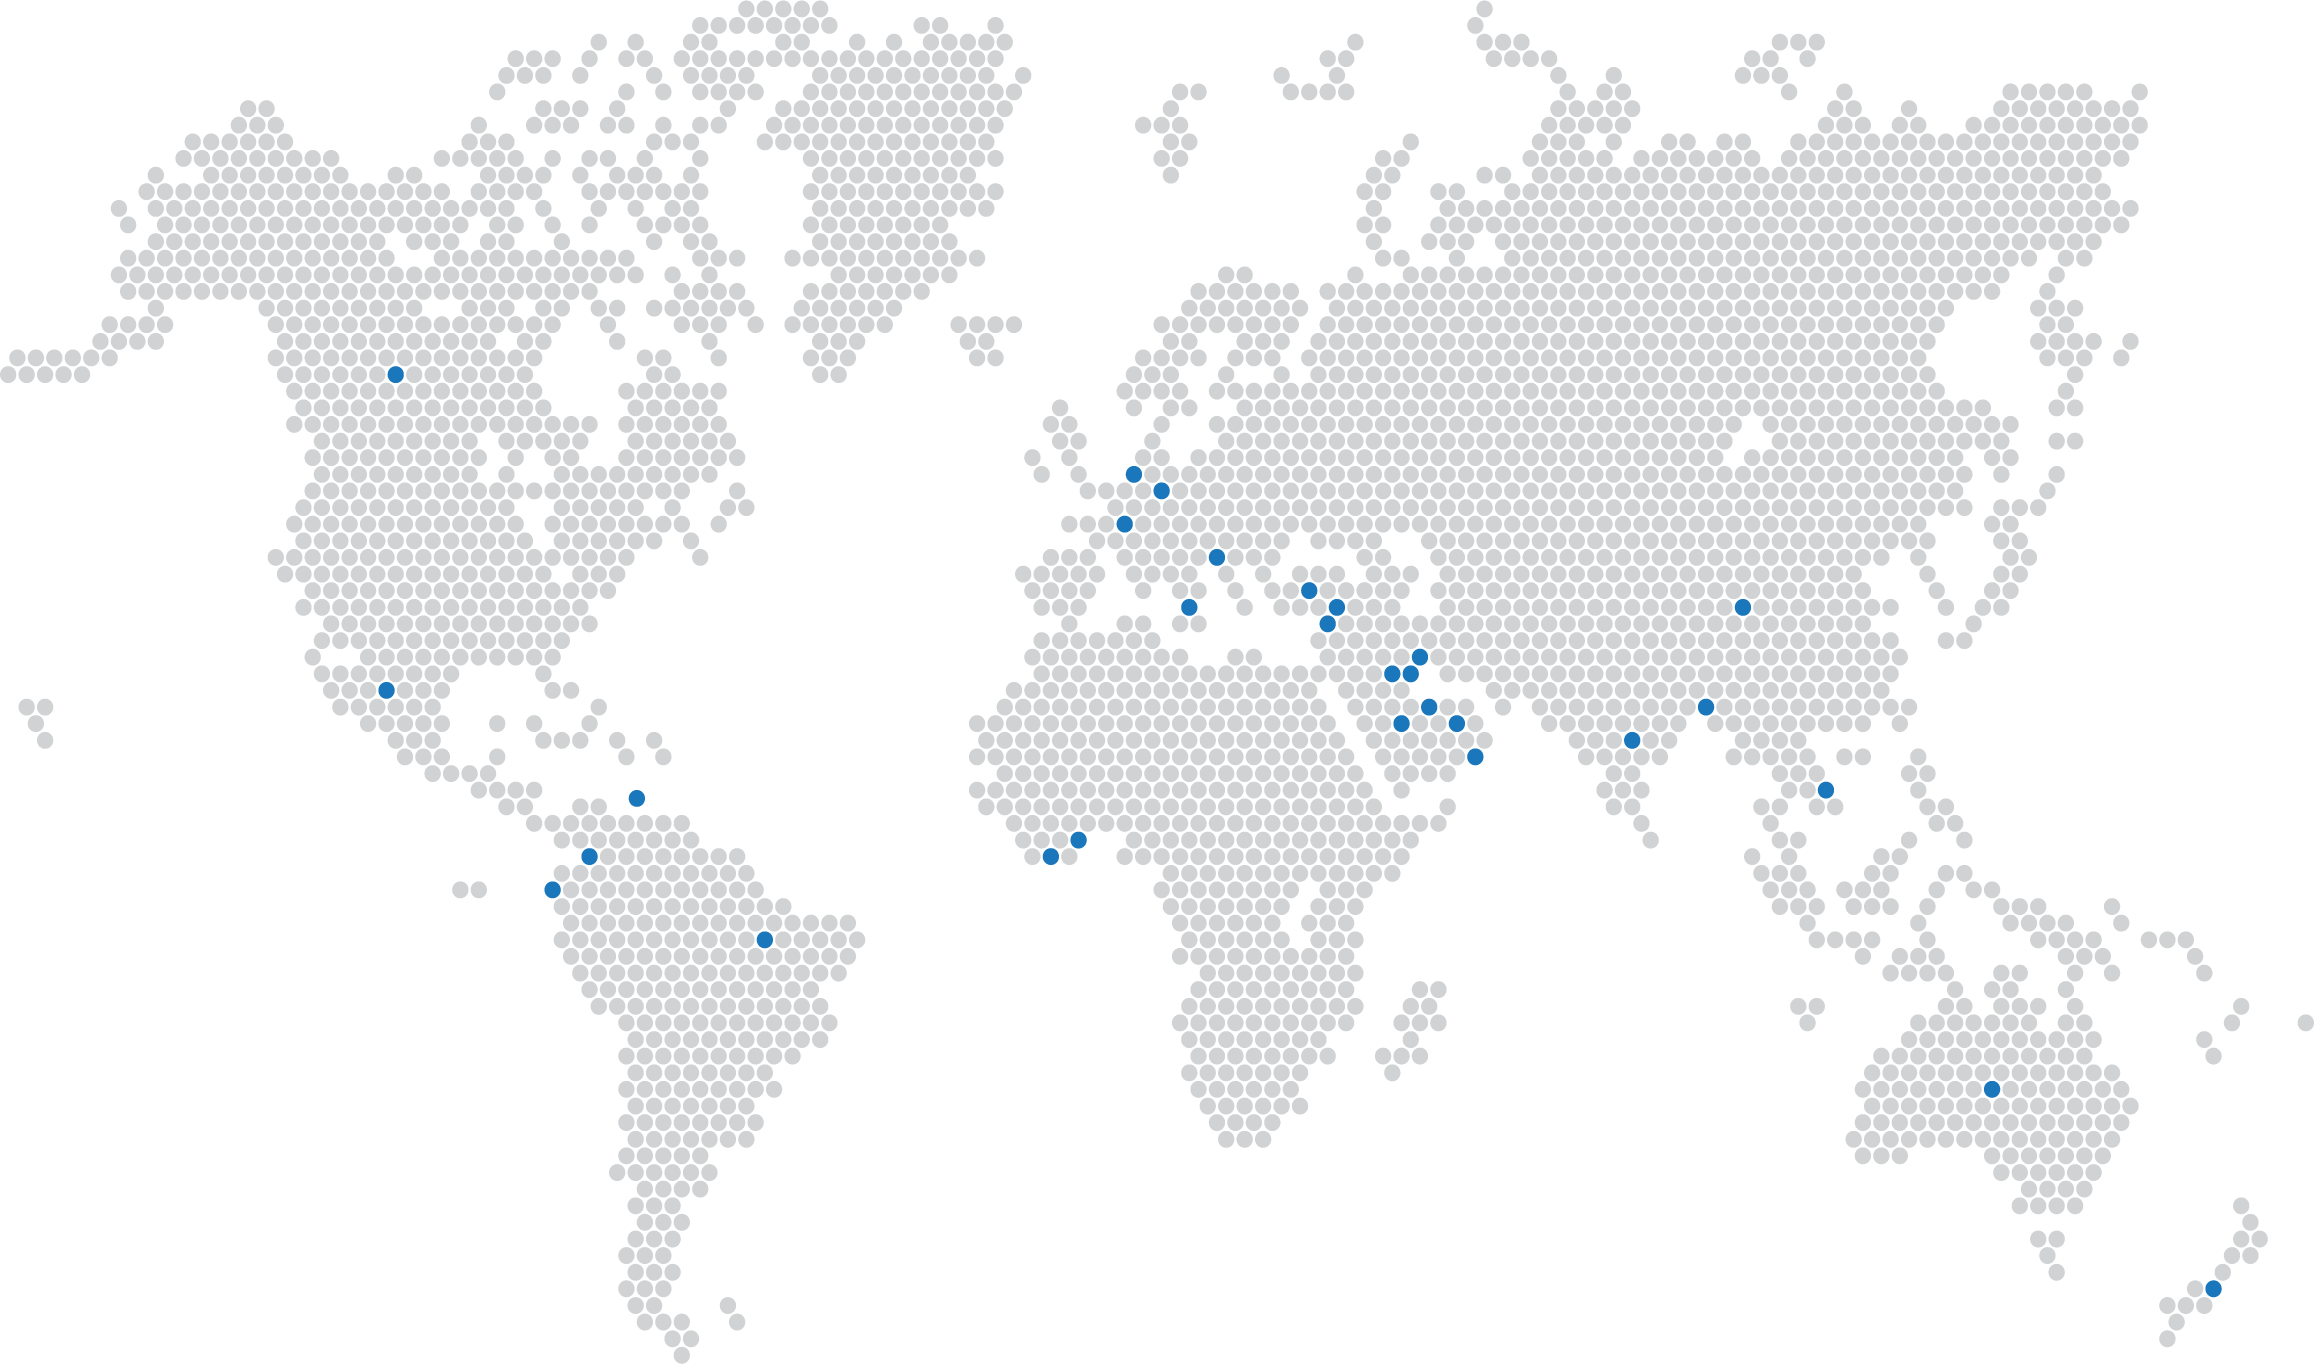 A world map showing Procurall's network in North America, South America, Africa, Europe, Asia, and Austrailia